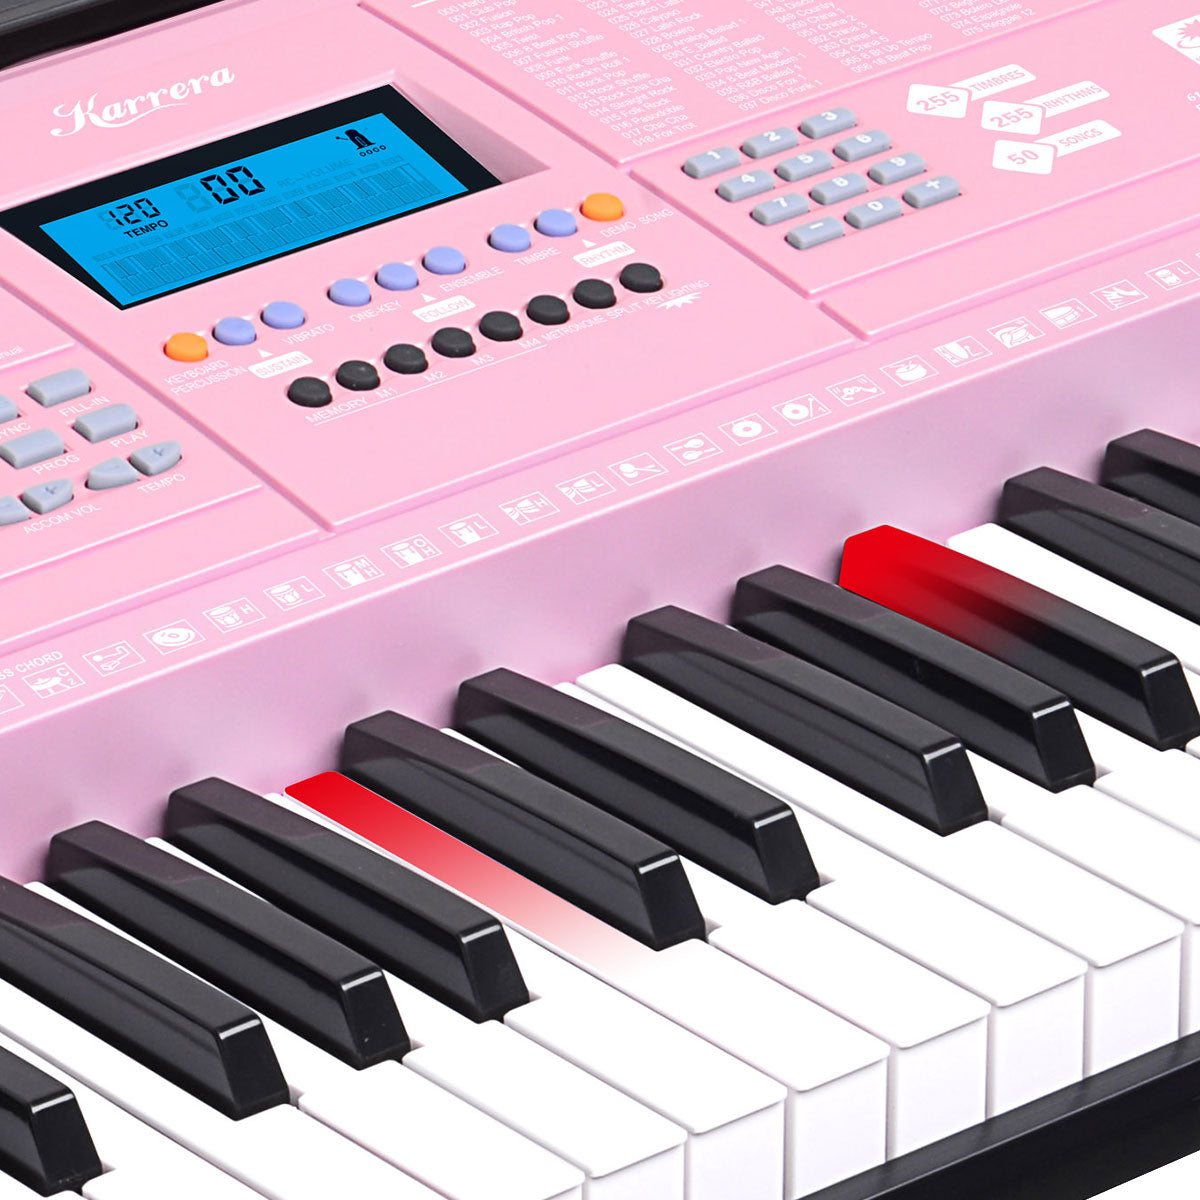 61 Keys Electronic LED Piano Keyboard with Stand - Pink